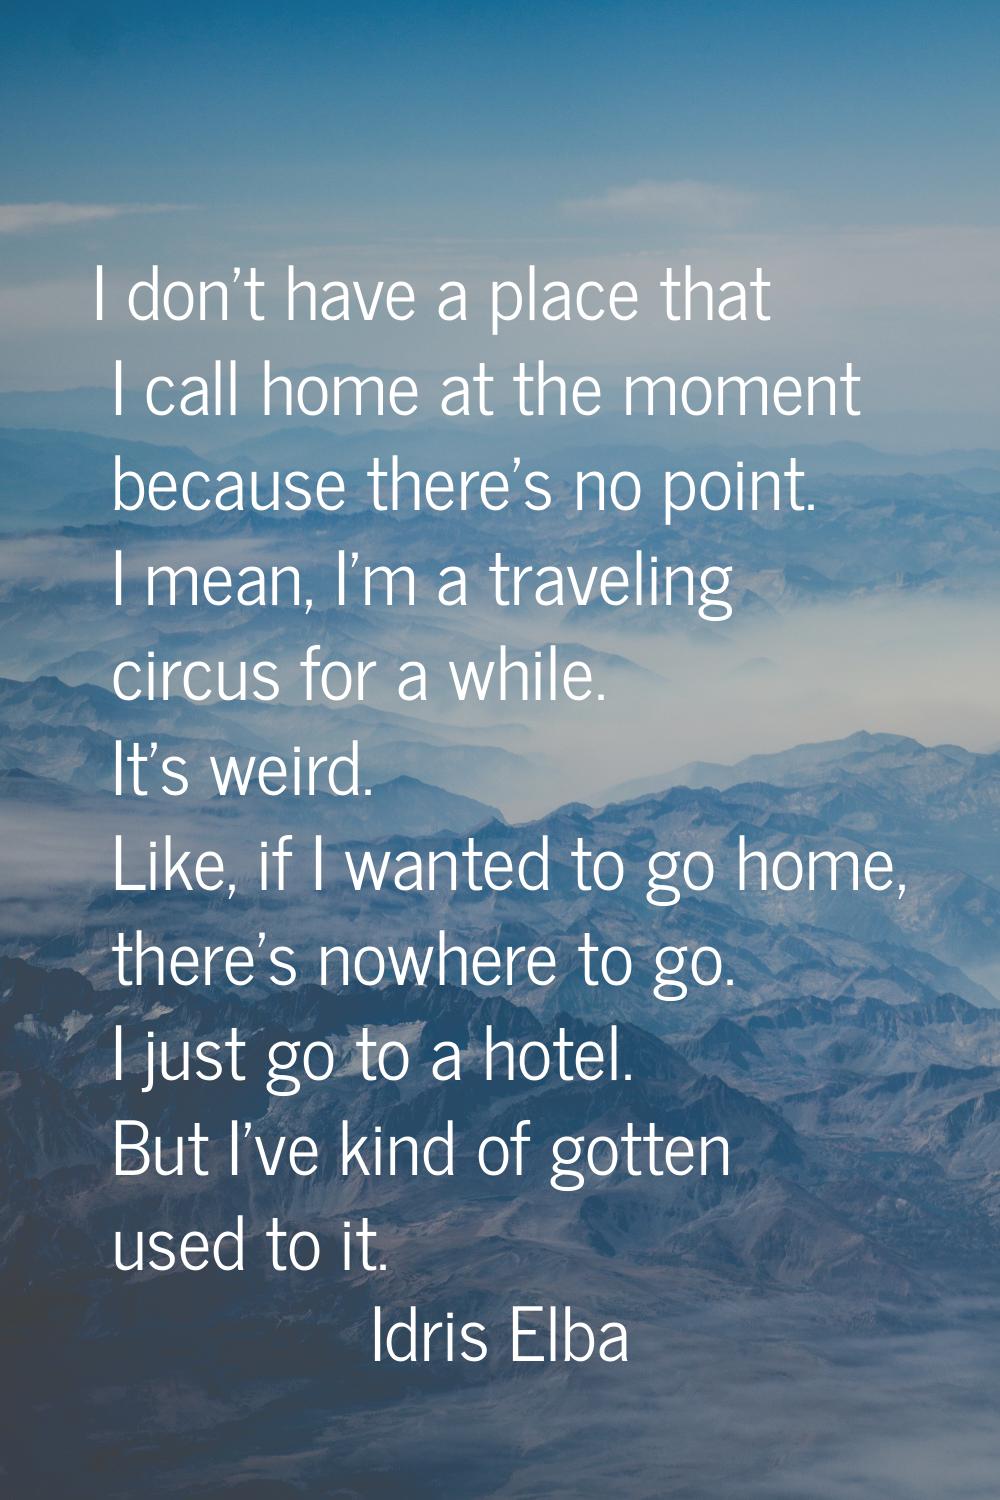 I don't have a place that I call home at the moment because there's no point. I mean, I'm a traveli